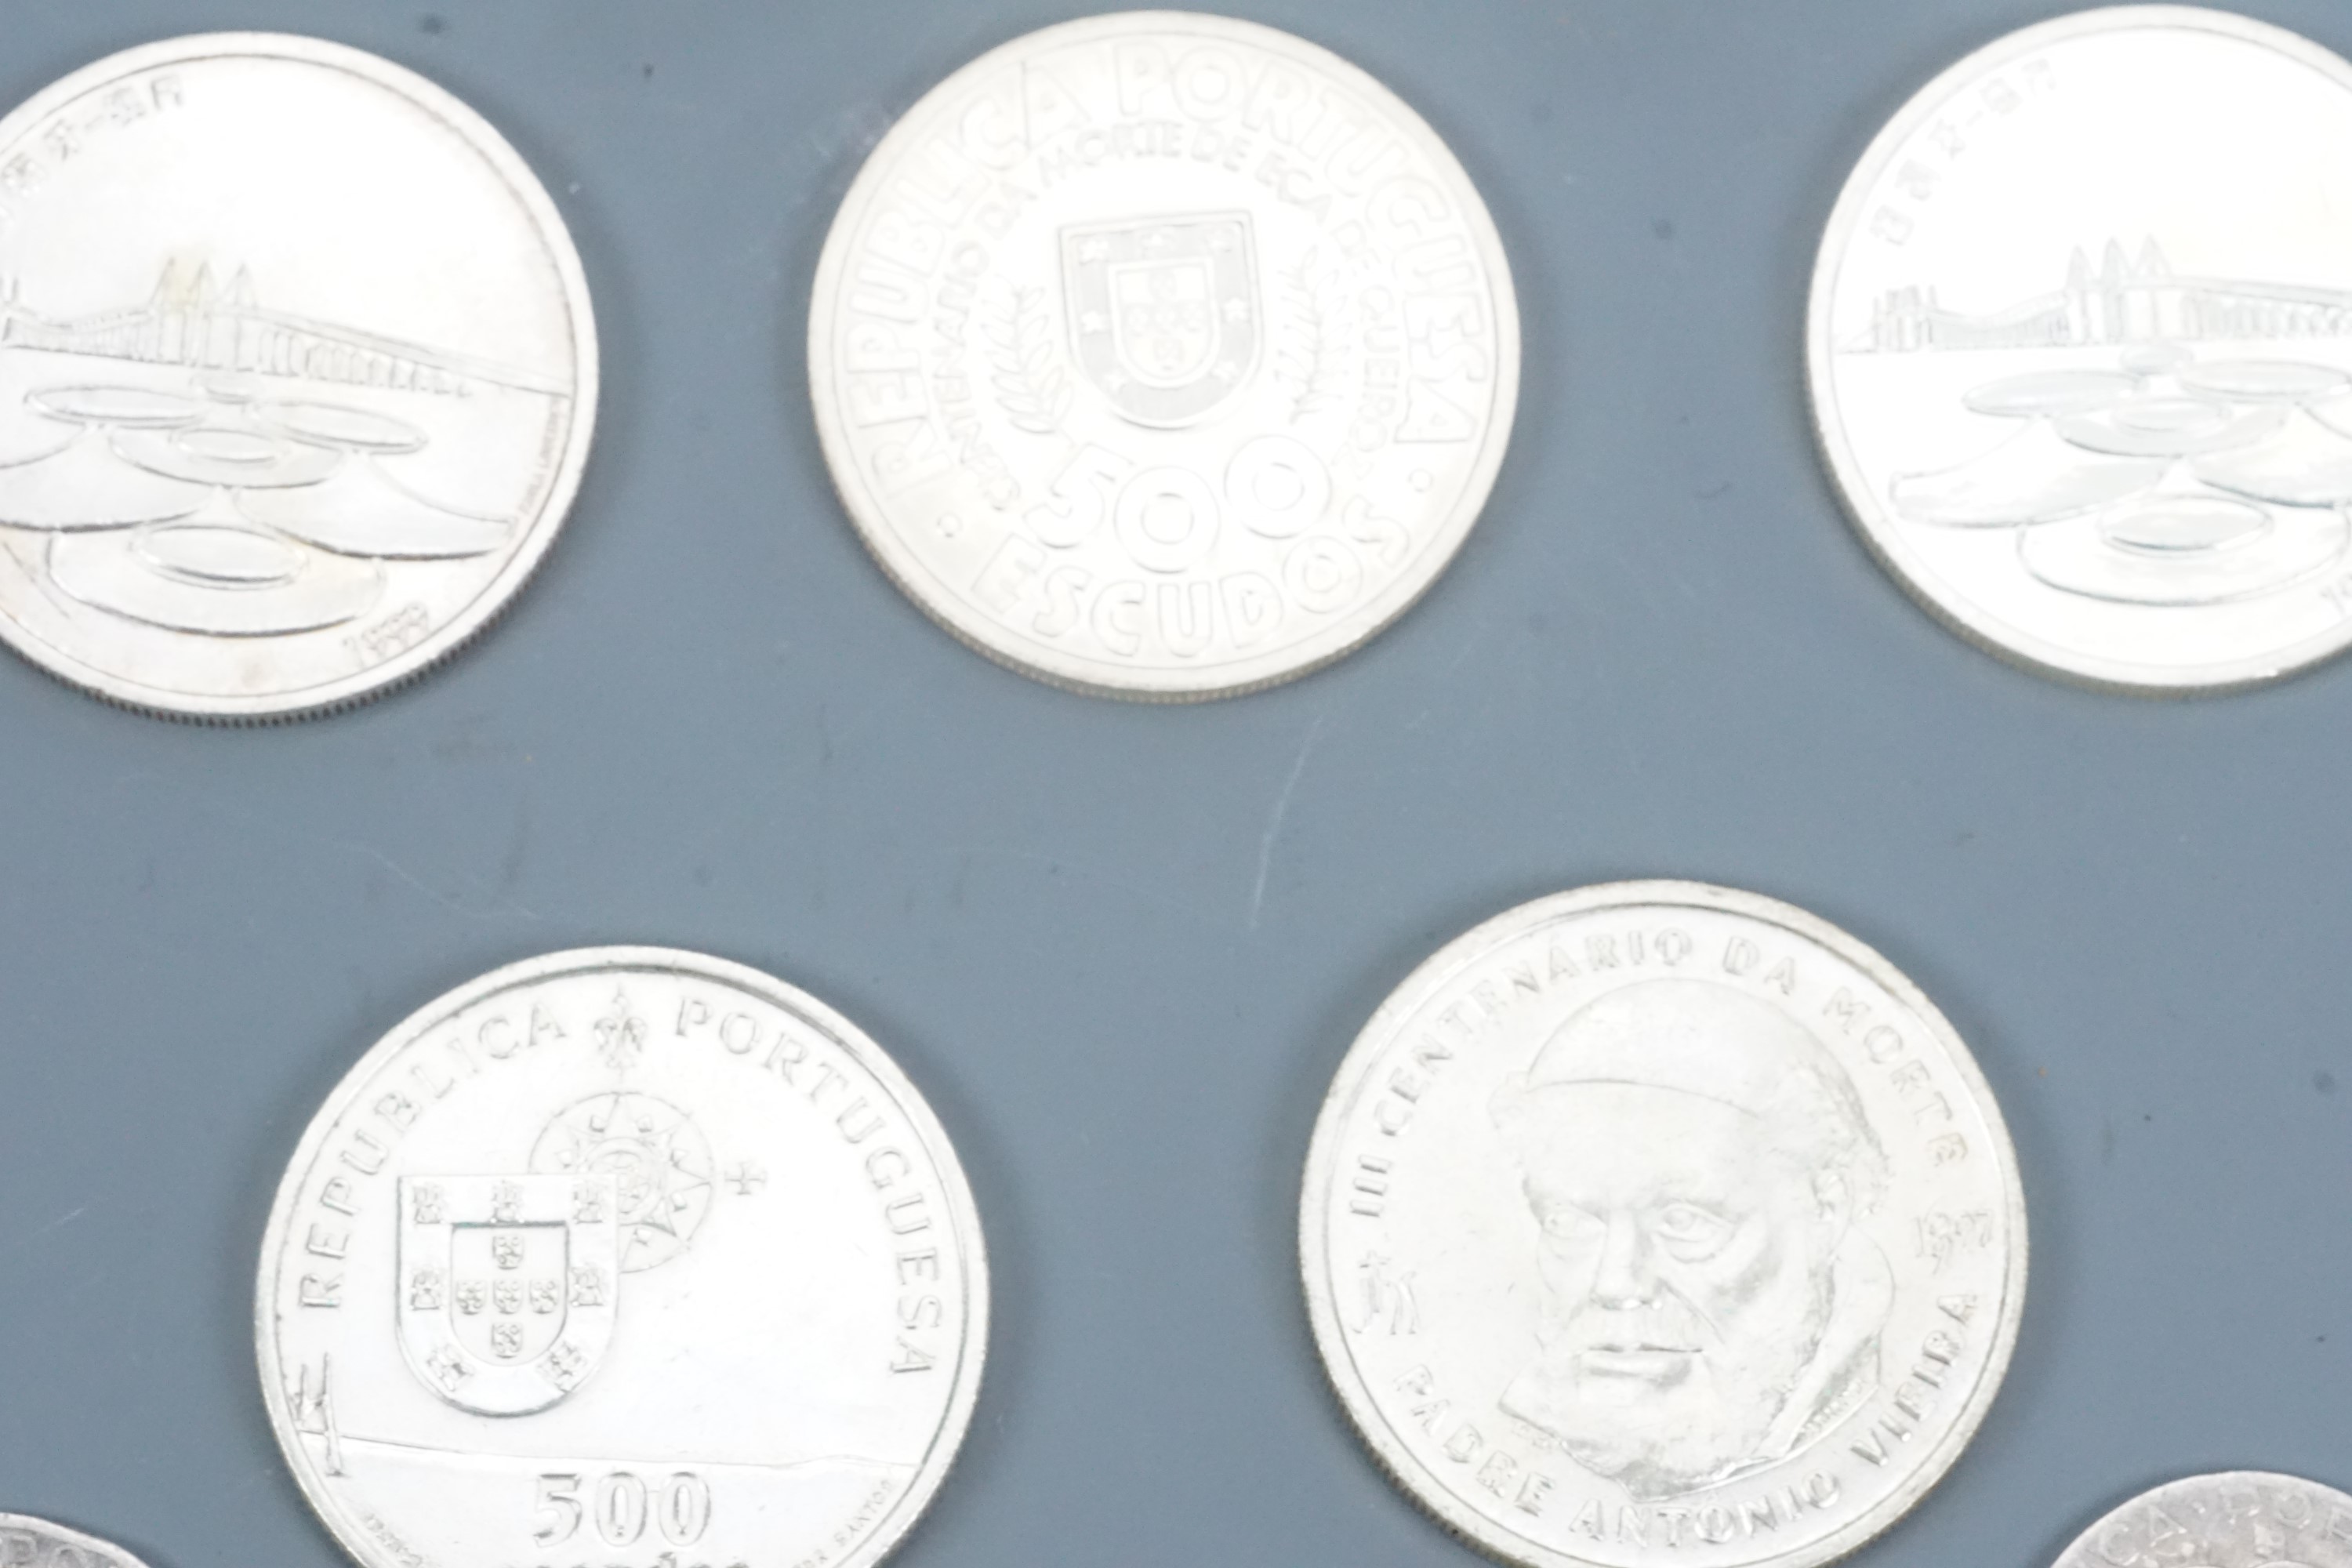 7 50 standard silver Portuguese 500 Escudos commemorative coins together with 3 650 standard - Image 3 of 4